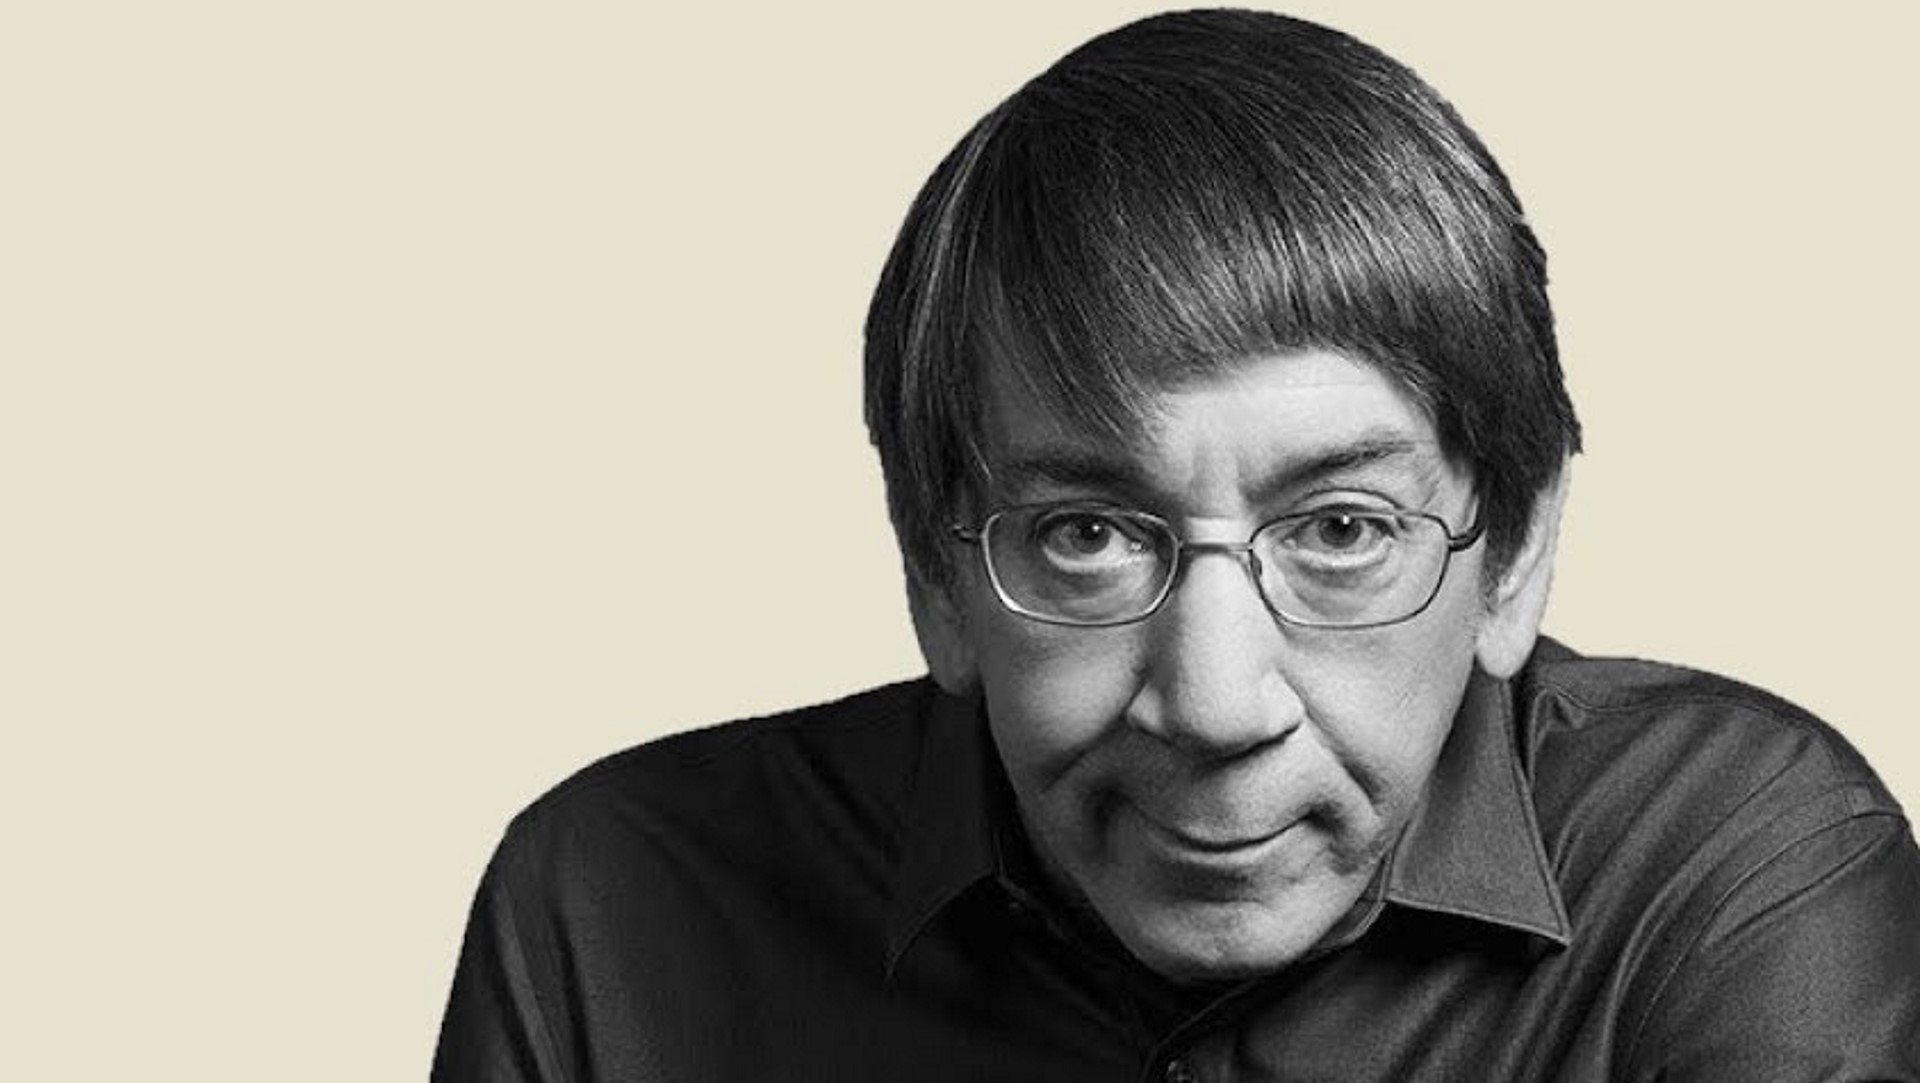  The Sims creator Will Wright is making a blockchain game because of course he is 